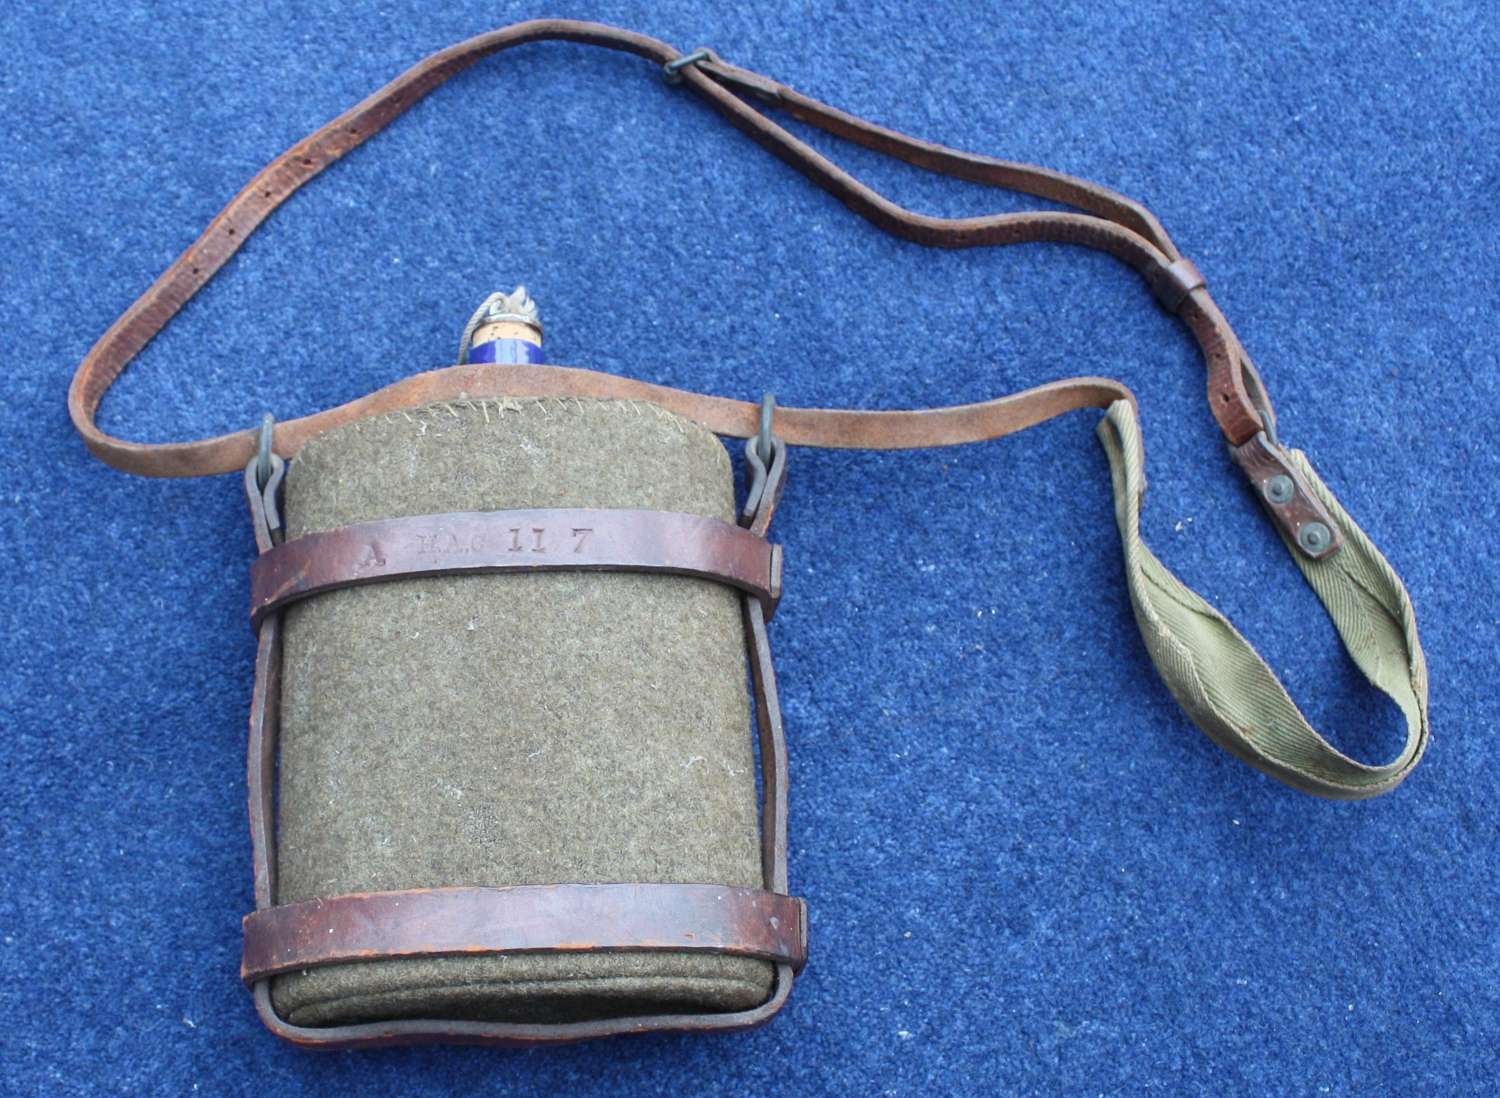 WW1 British Army Leather Water Bottle Carrier & Bottle: Dated 1918